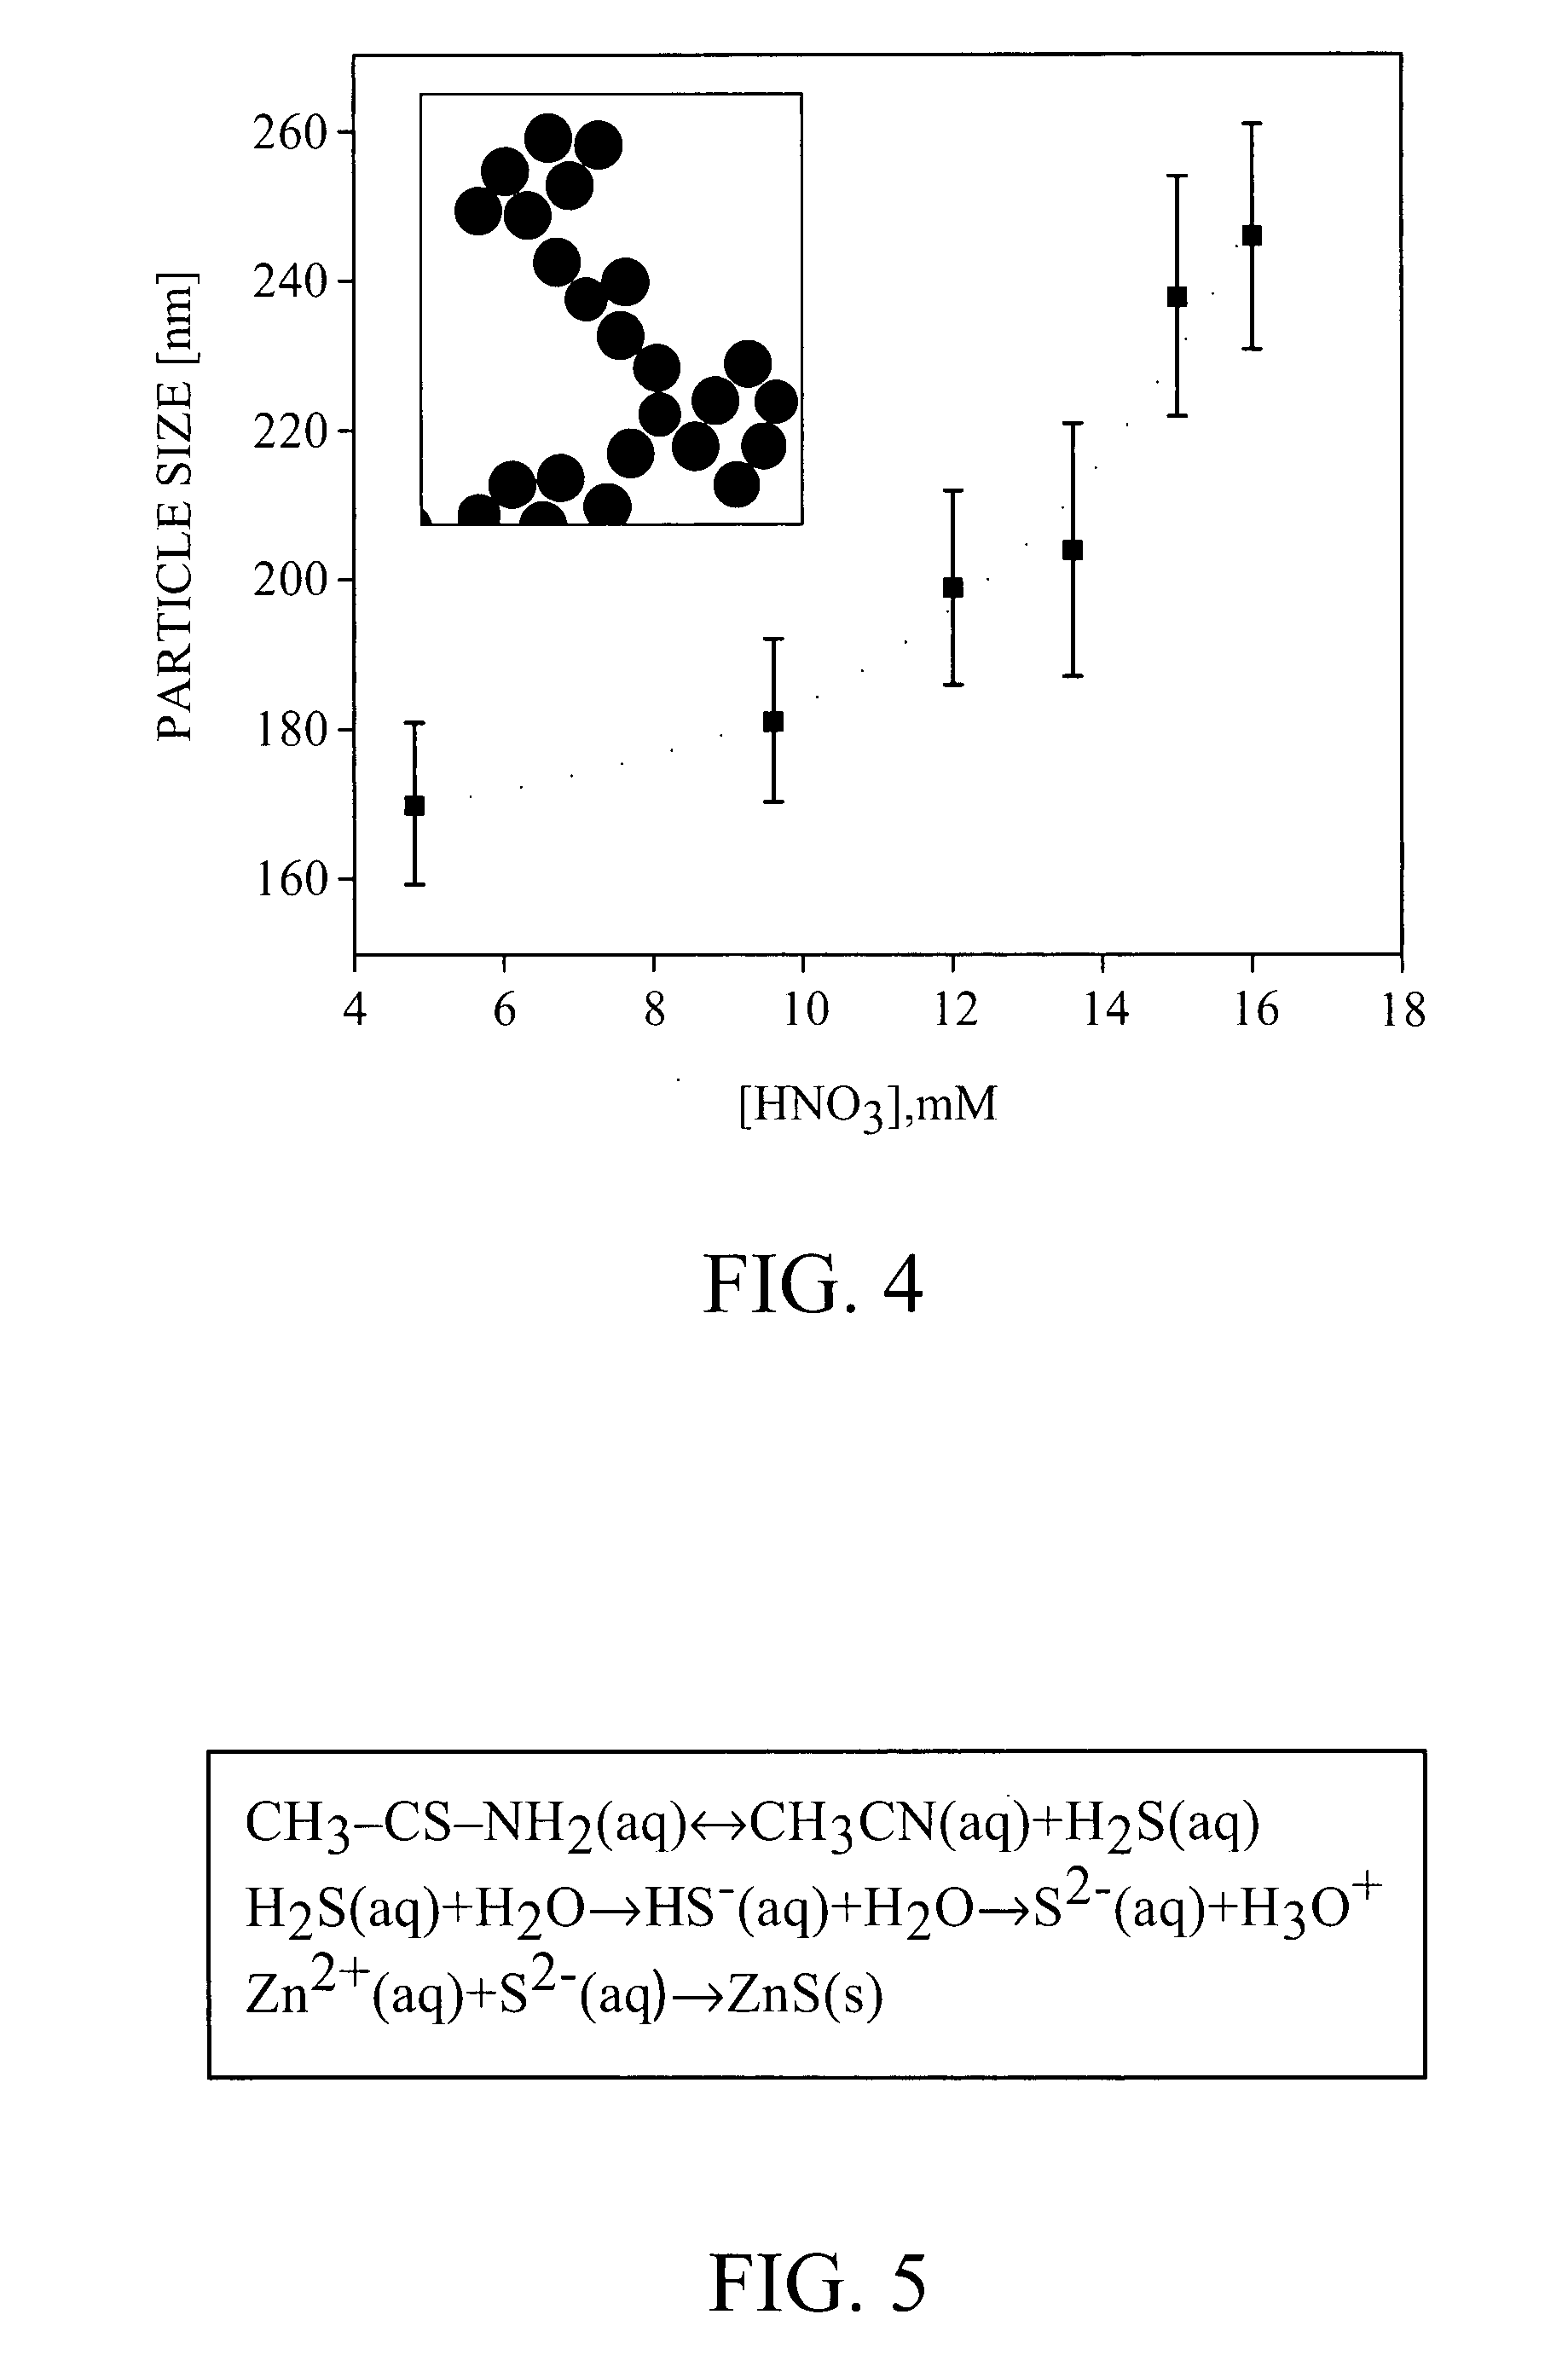 High refractive index crystalline colloidal arrays materials and a process for making the same